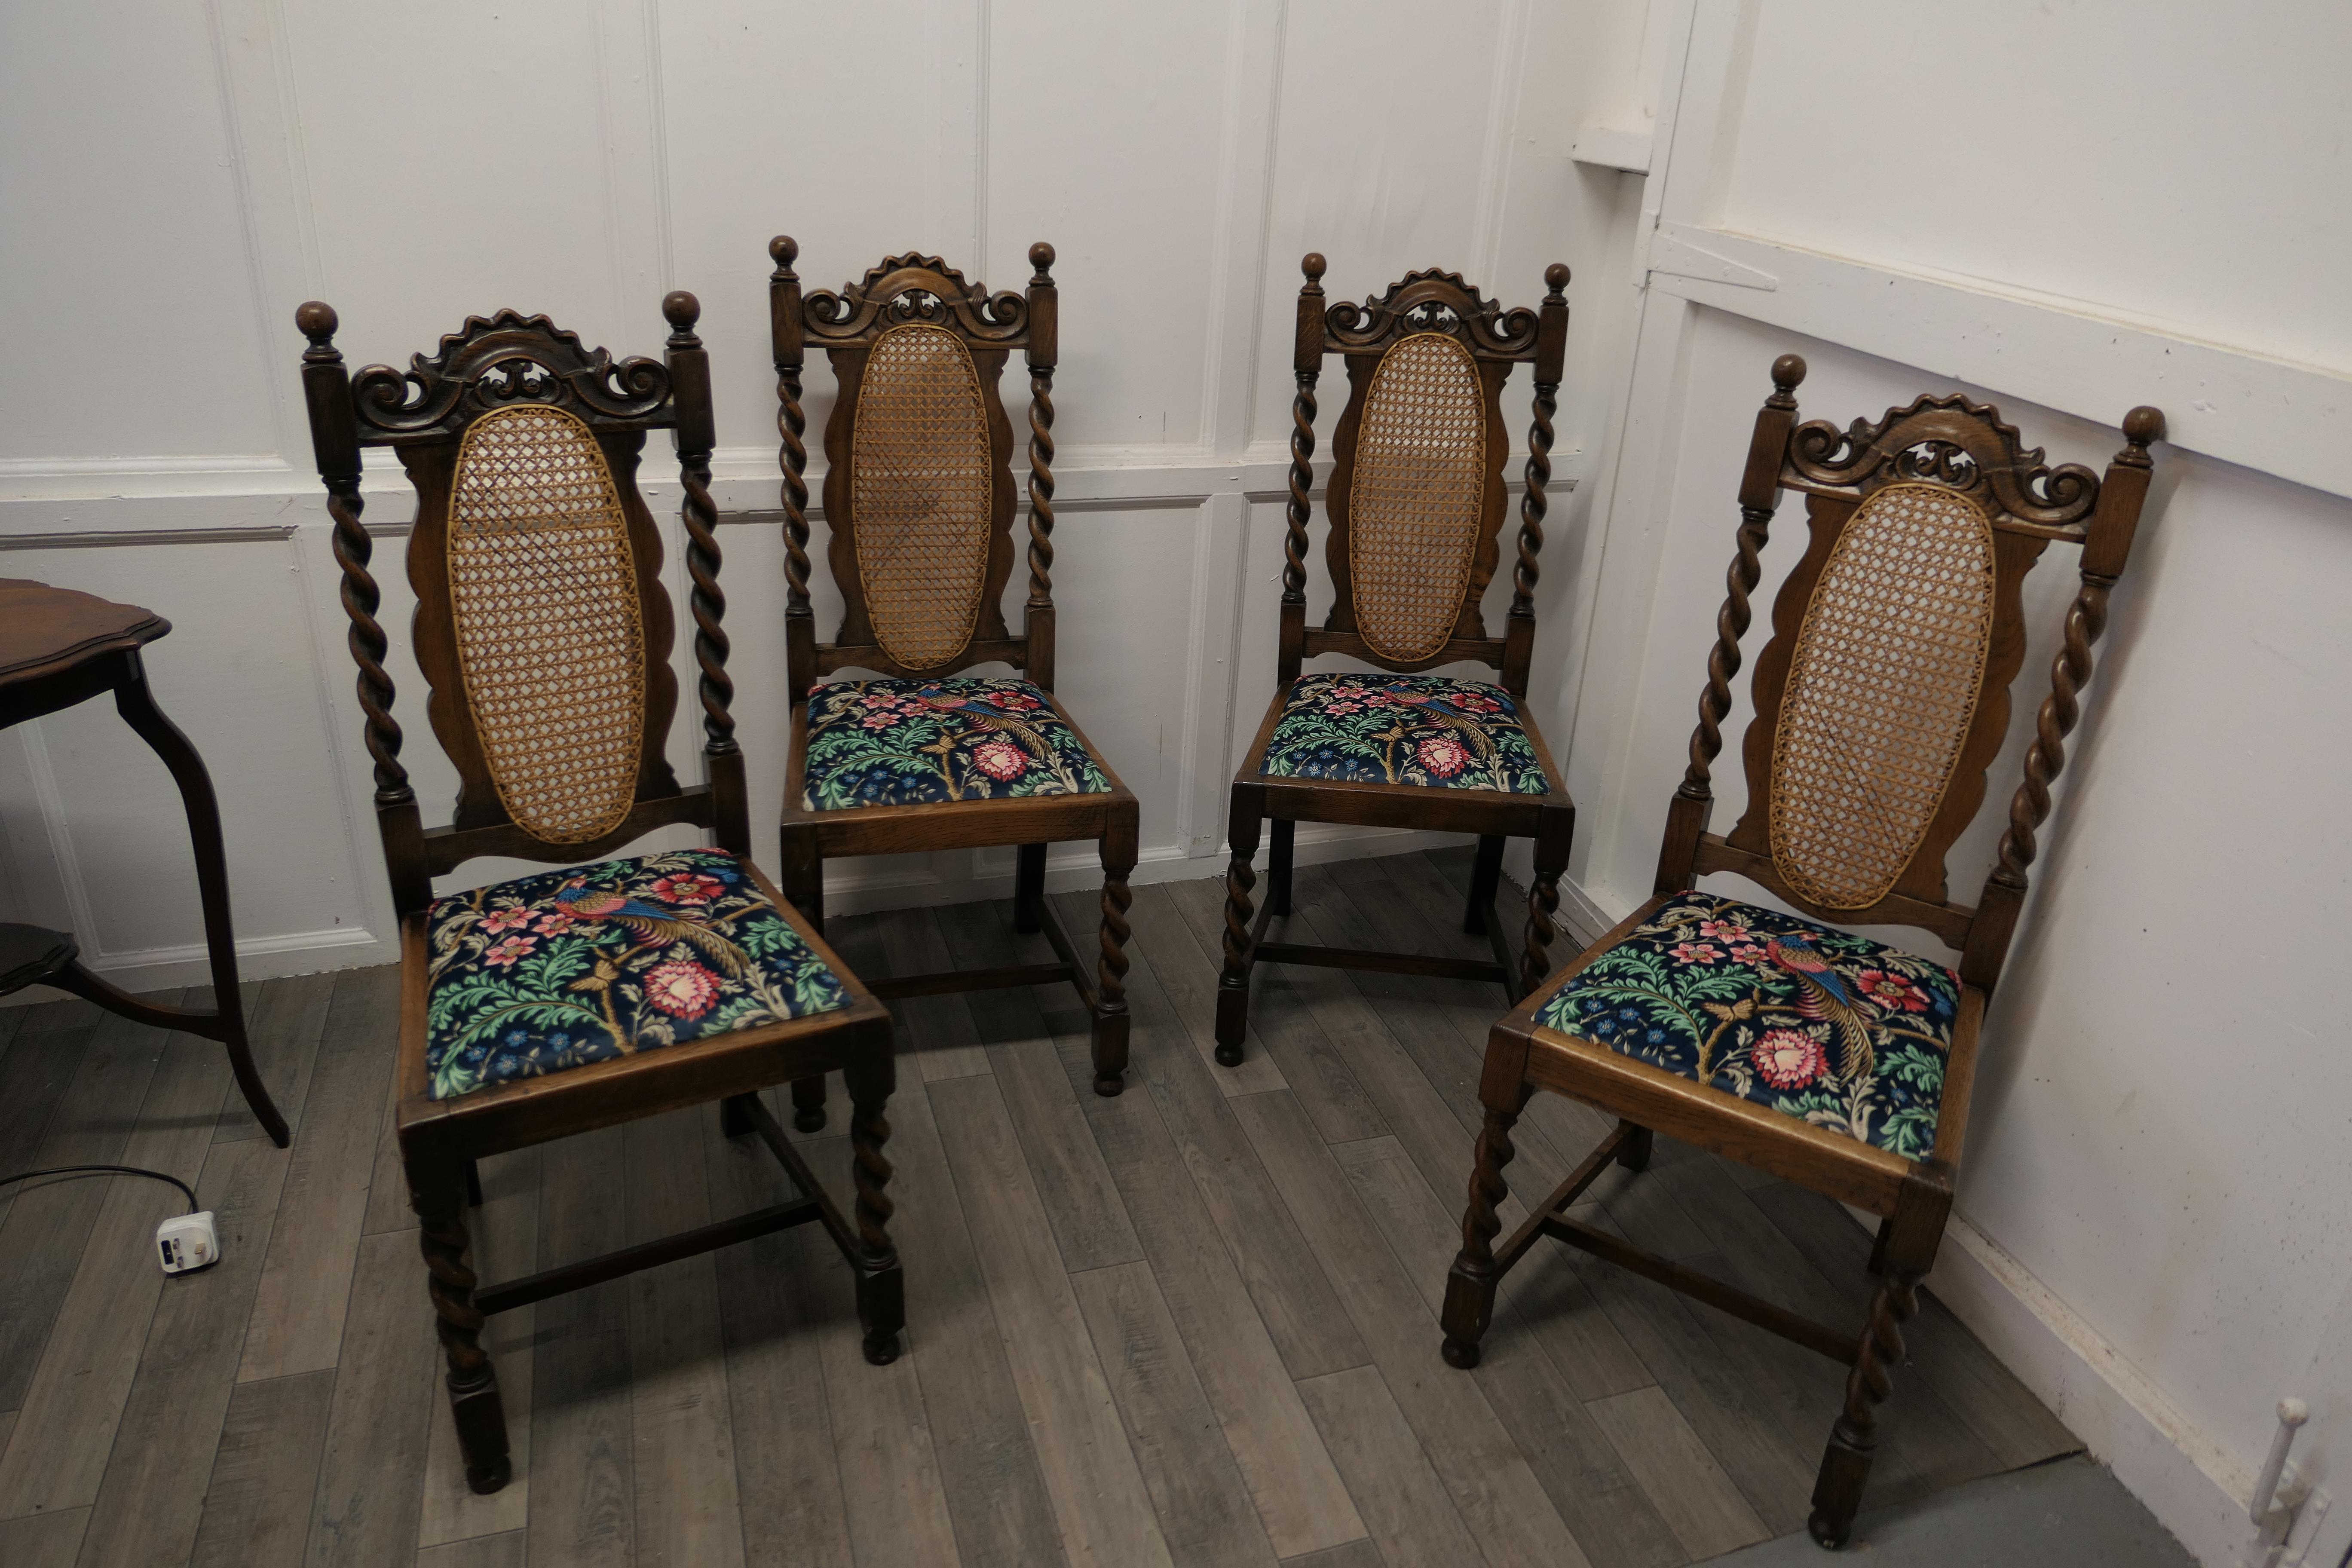 Gothic Revival A Set of 4 Victorian Barley Twist Oak Dining Chairs     This is a lovely set   For Sale